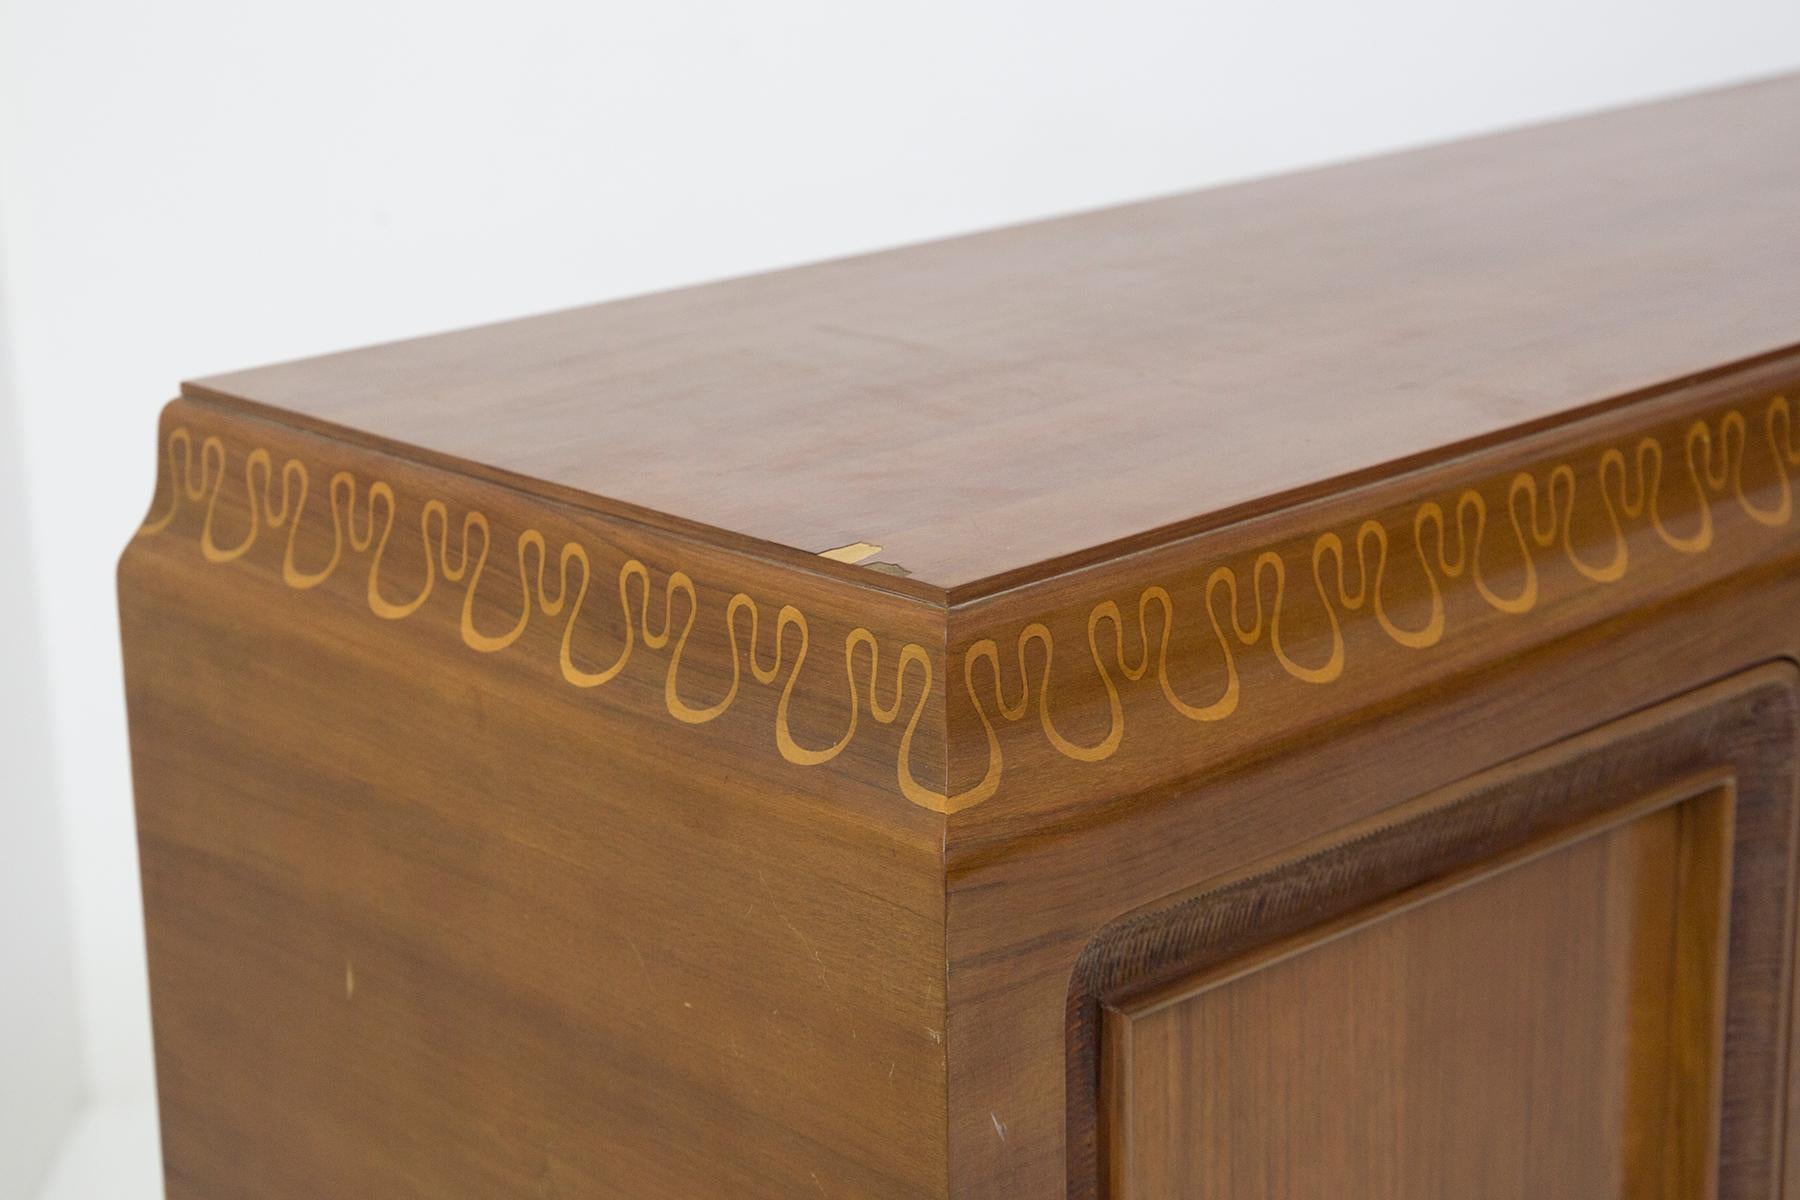 Splendid sideboard designed in the 1950s for the famous Valzania production with original label.
The sideboard is entirely made of solid walnut wood decorated and carved with elegant ornaments and gold-coloured decorations.
There are 4 legs